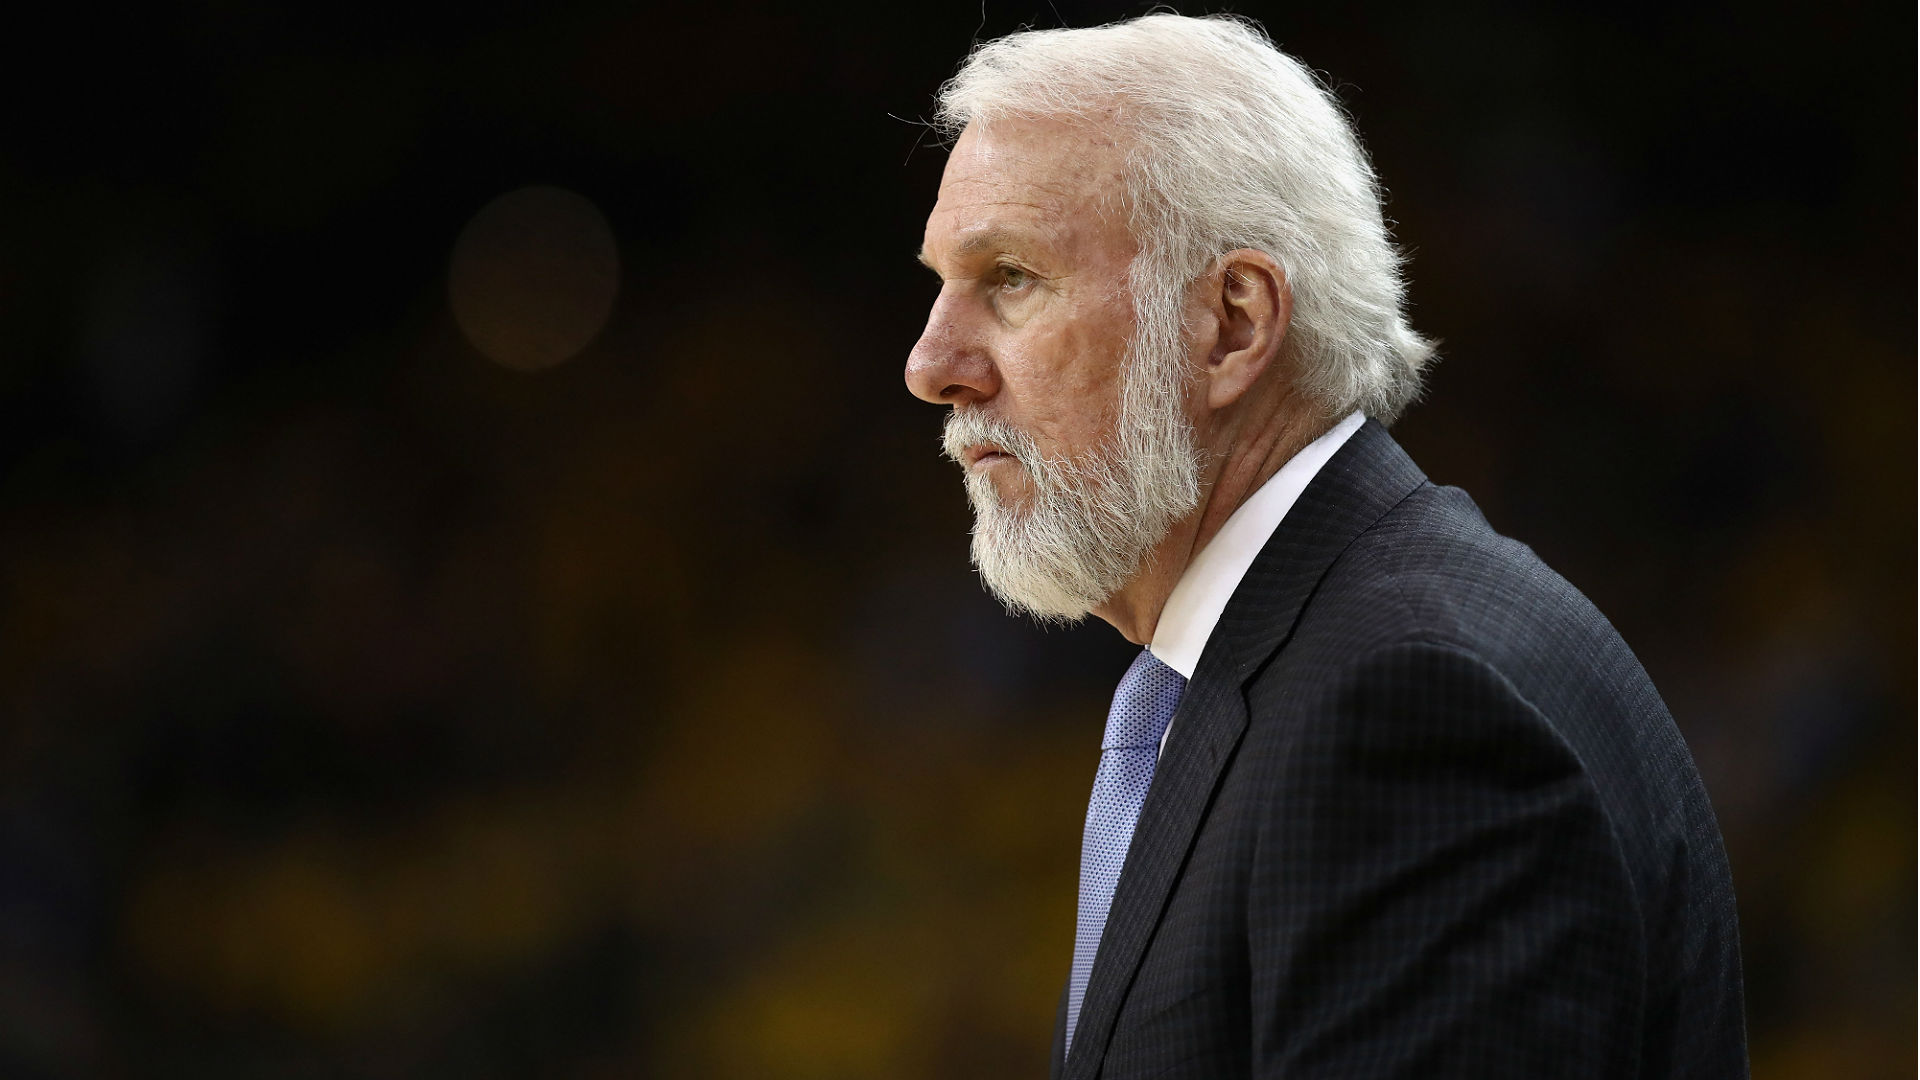 Just 63 seconds into the San Antonio Spurs' meeting with the Denver Nuggets, Gregg Popovich was ejected.